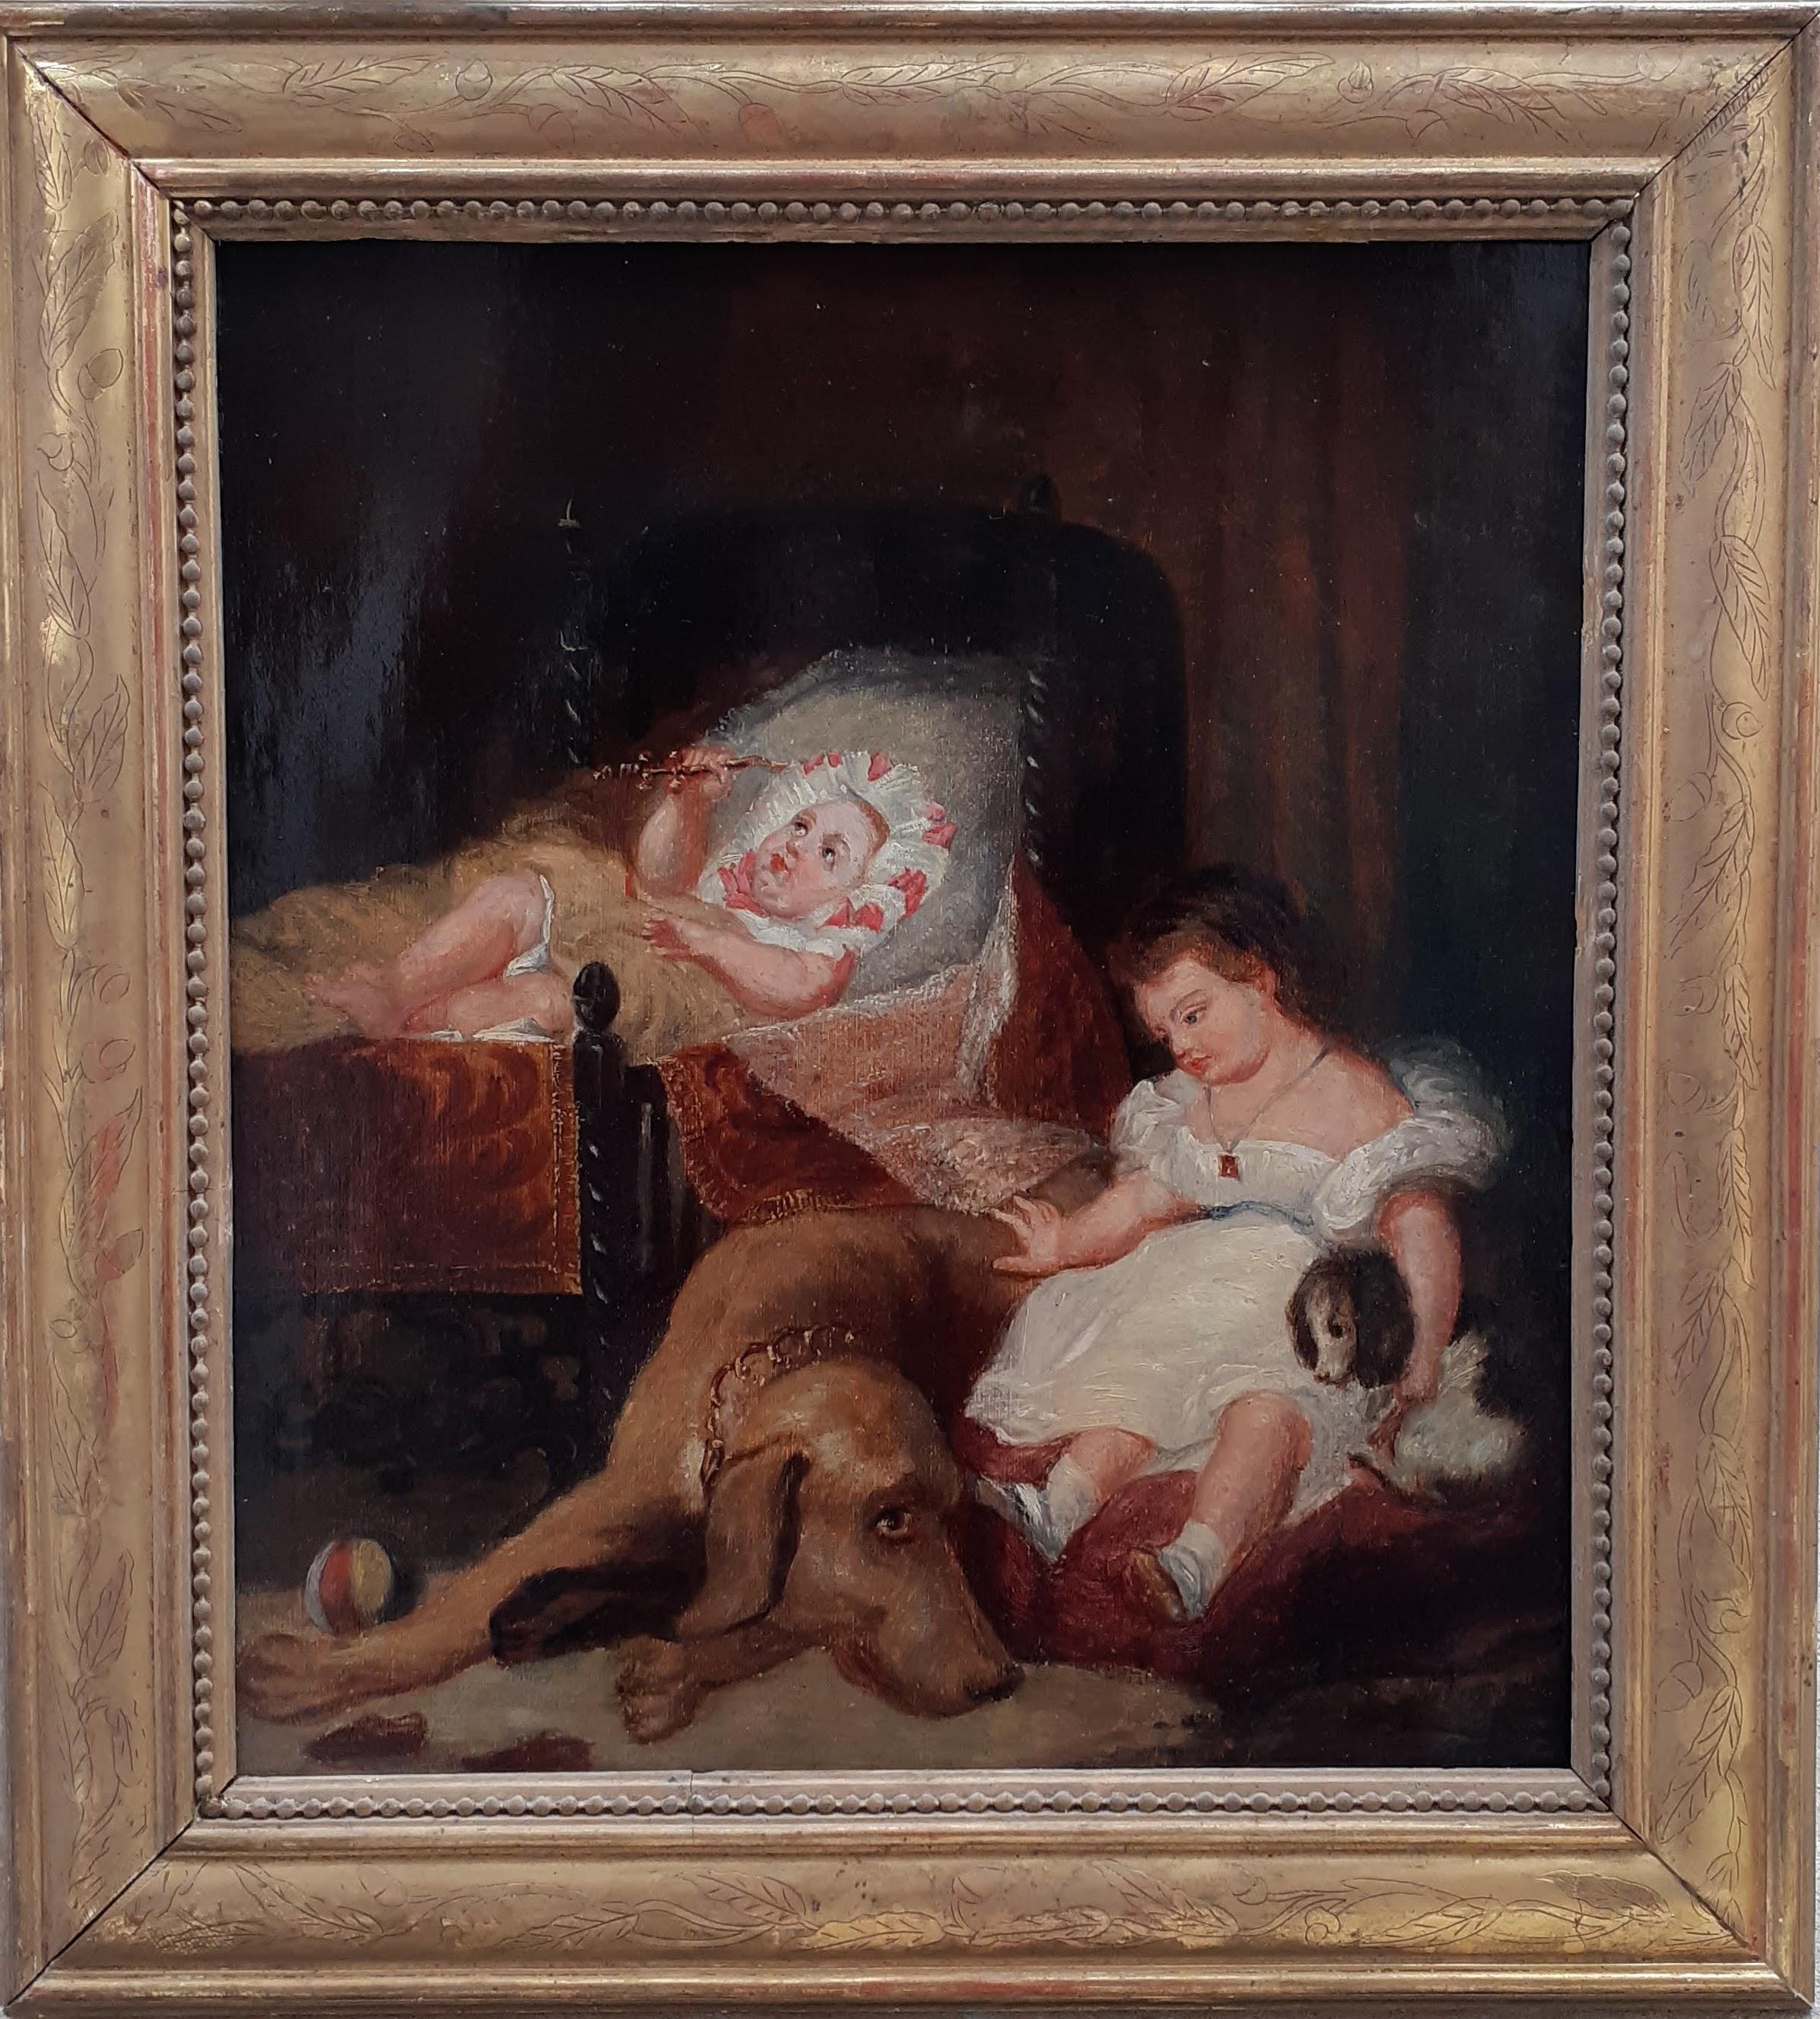 Family scene, children dog and pup, French painting by Delacroix' prodigy friend